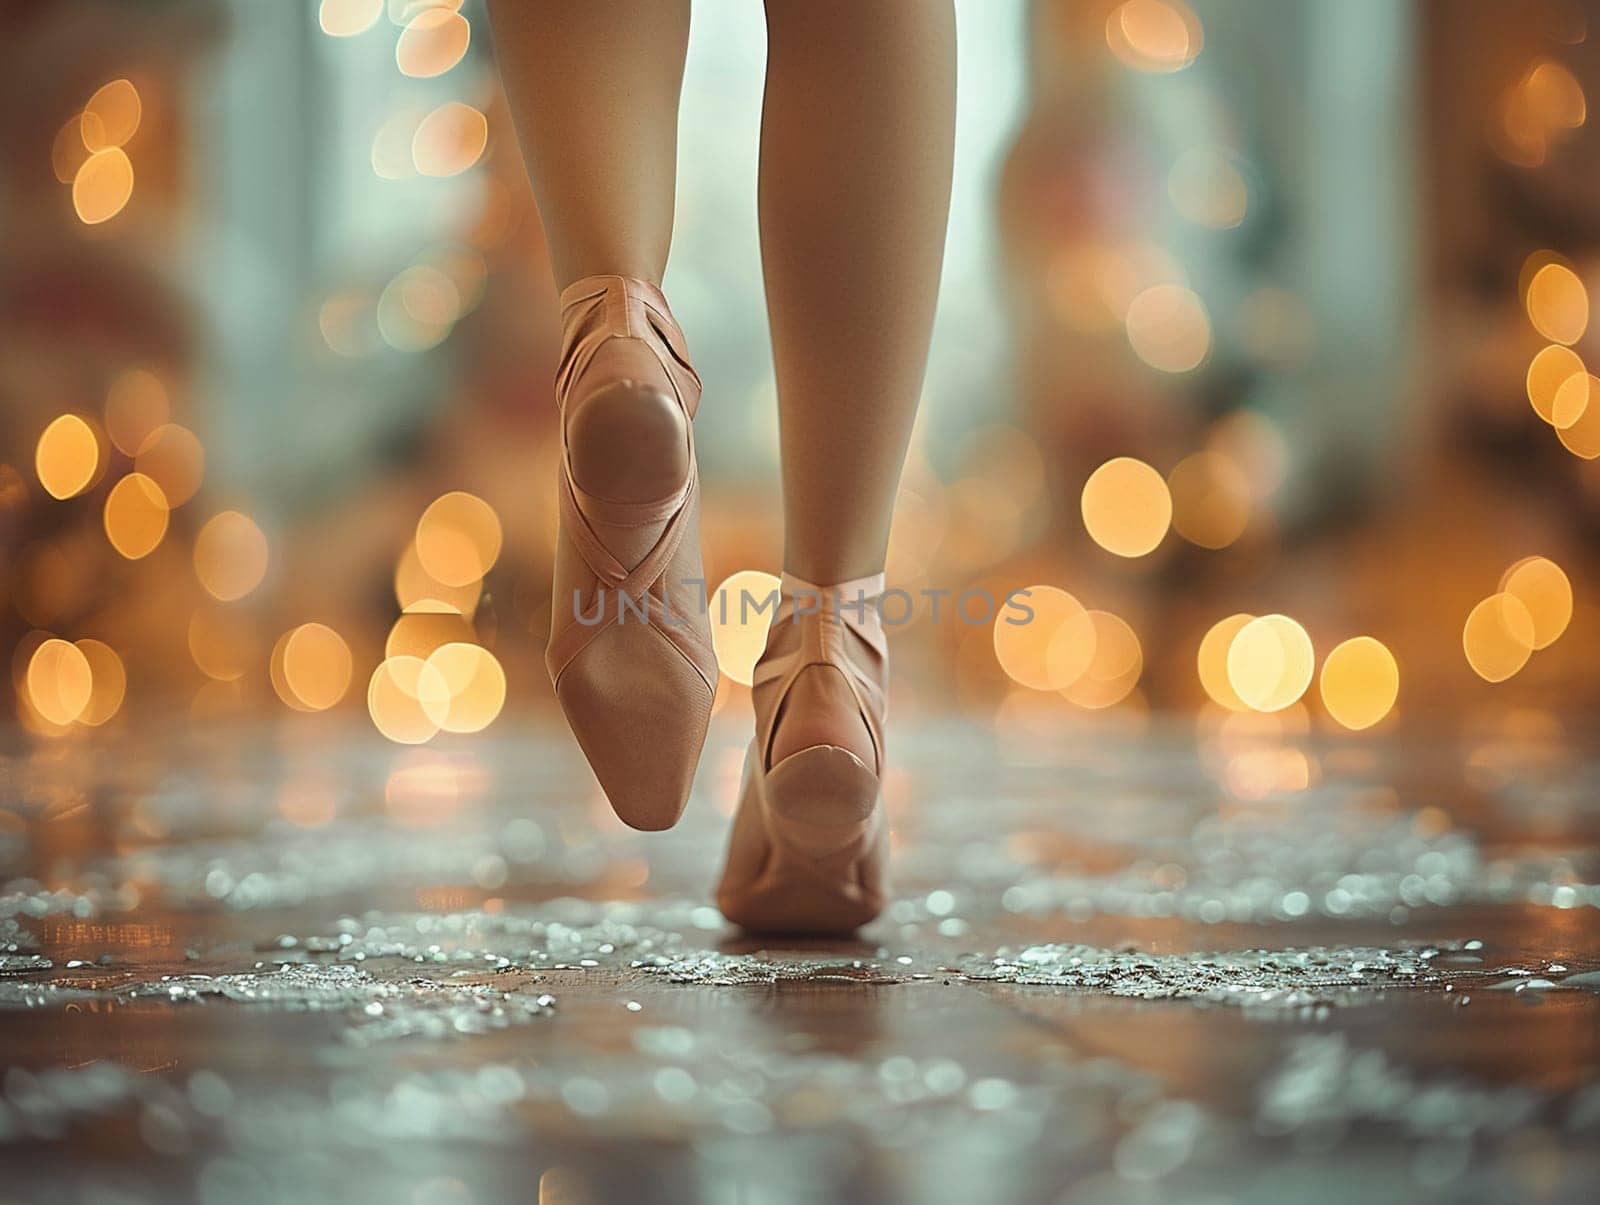 Ballet dancer's feet on pointe, representing discipline and grace in dance